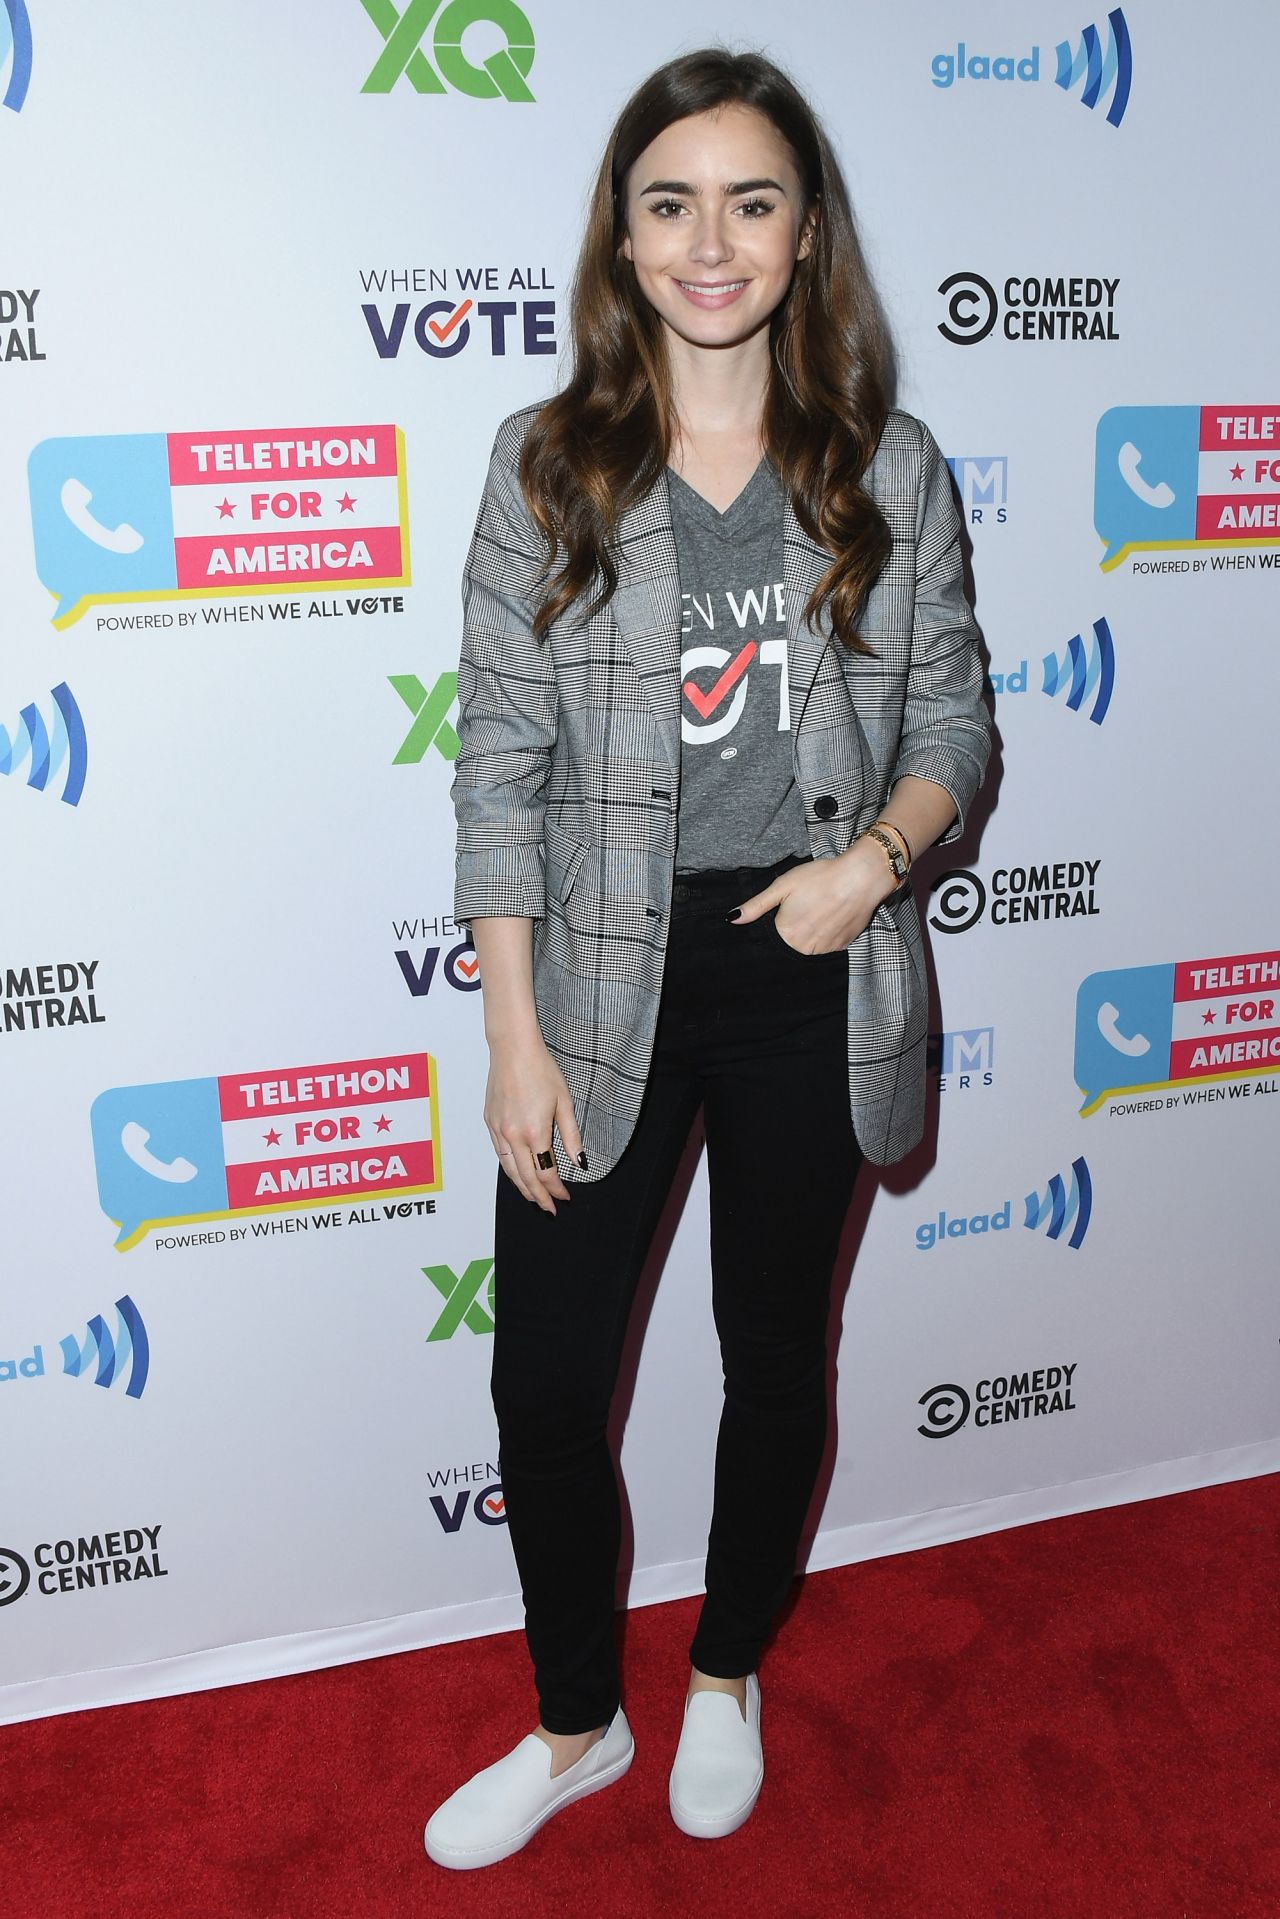 https://celebmafia.com/wp-content/uploads/2018/11/lily-collins-telethon-for-america-in-los-angeles-11-05-2018-4.jpg